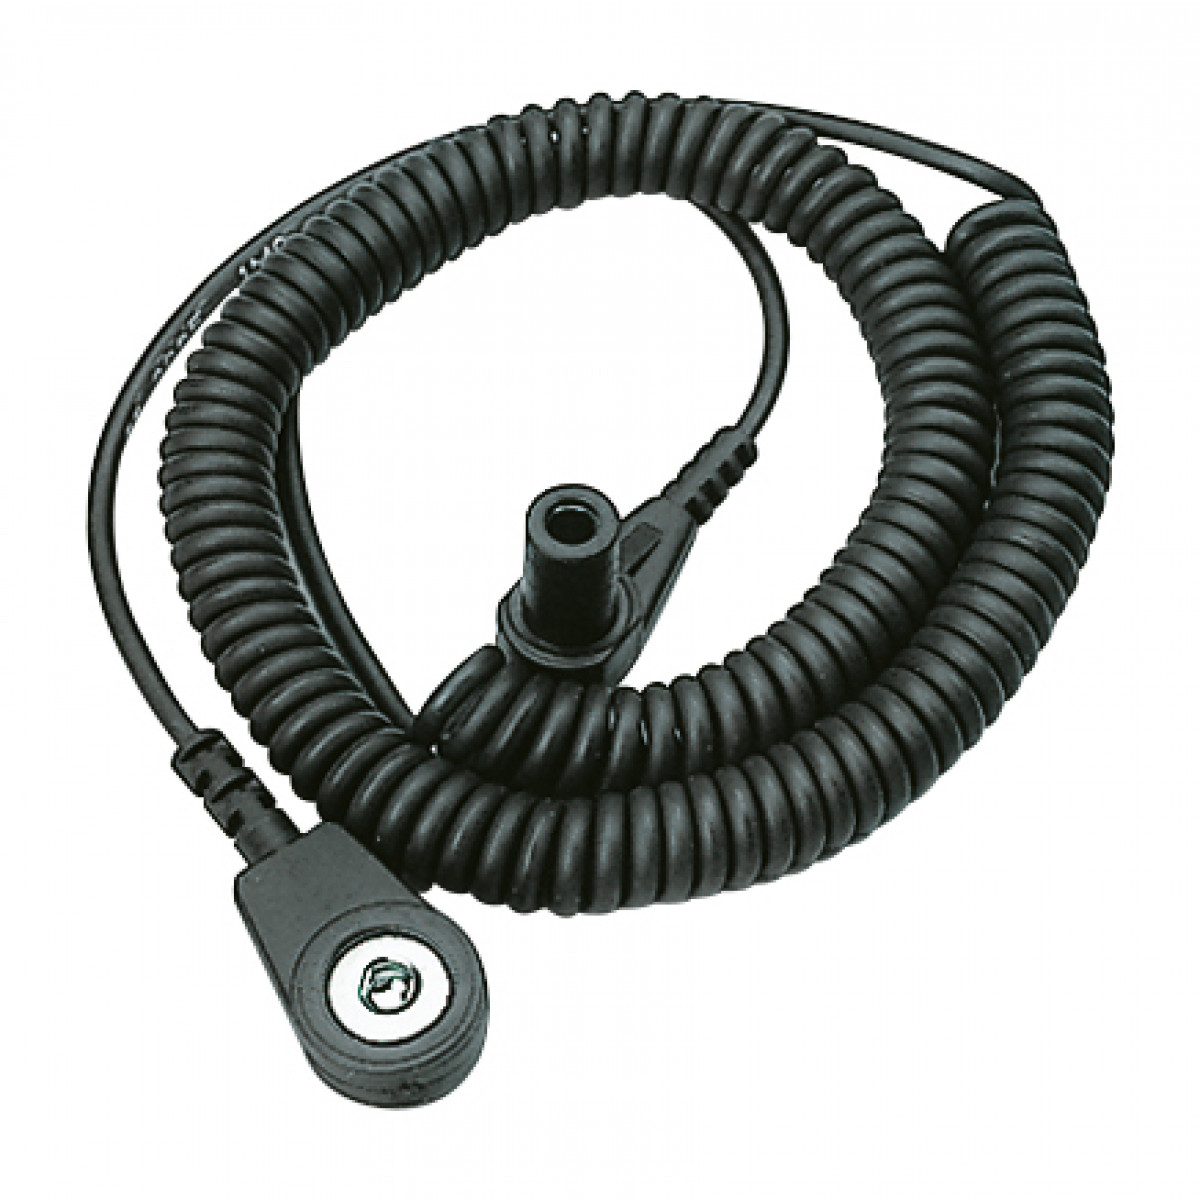 ESD spiral cable with socket